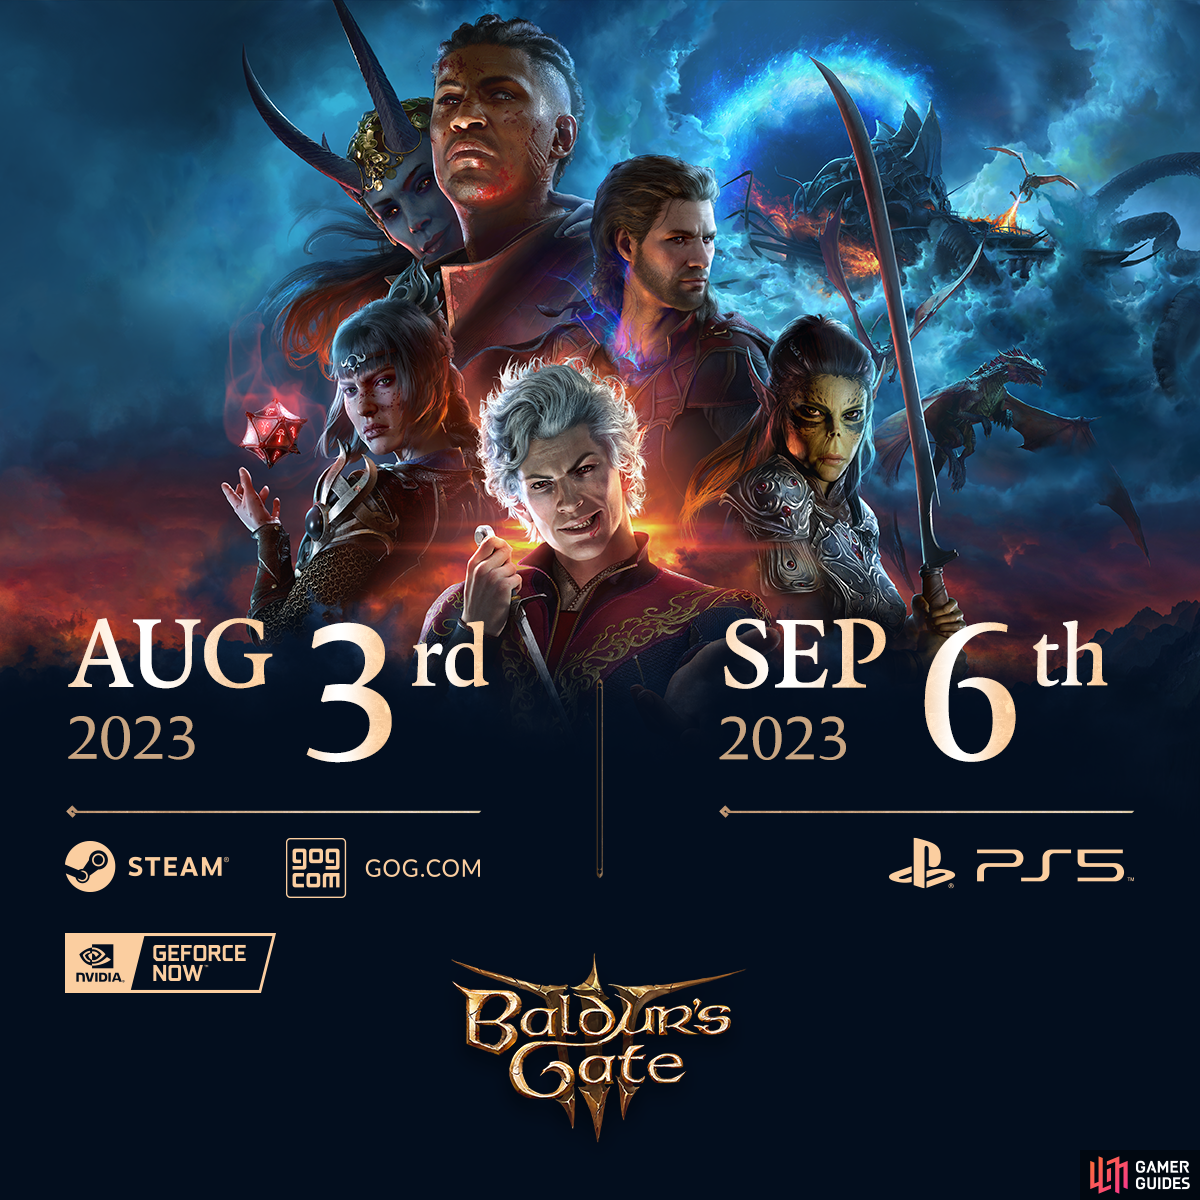 Baldur’s Gate 3 launches on August 3rd for PC and September 6th on PlayStation 5.